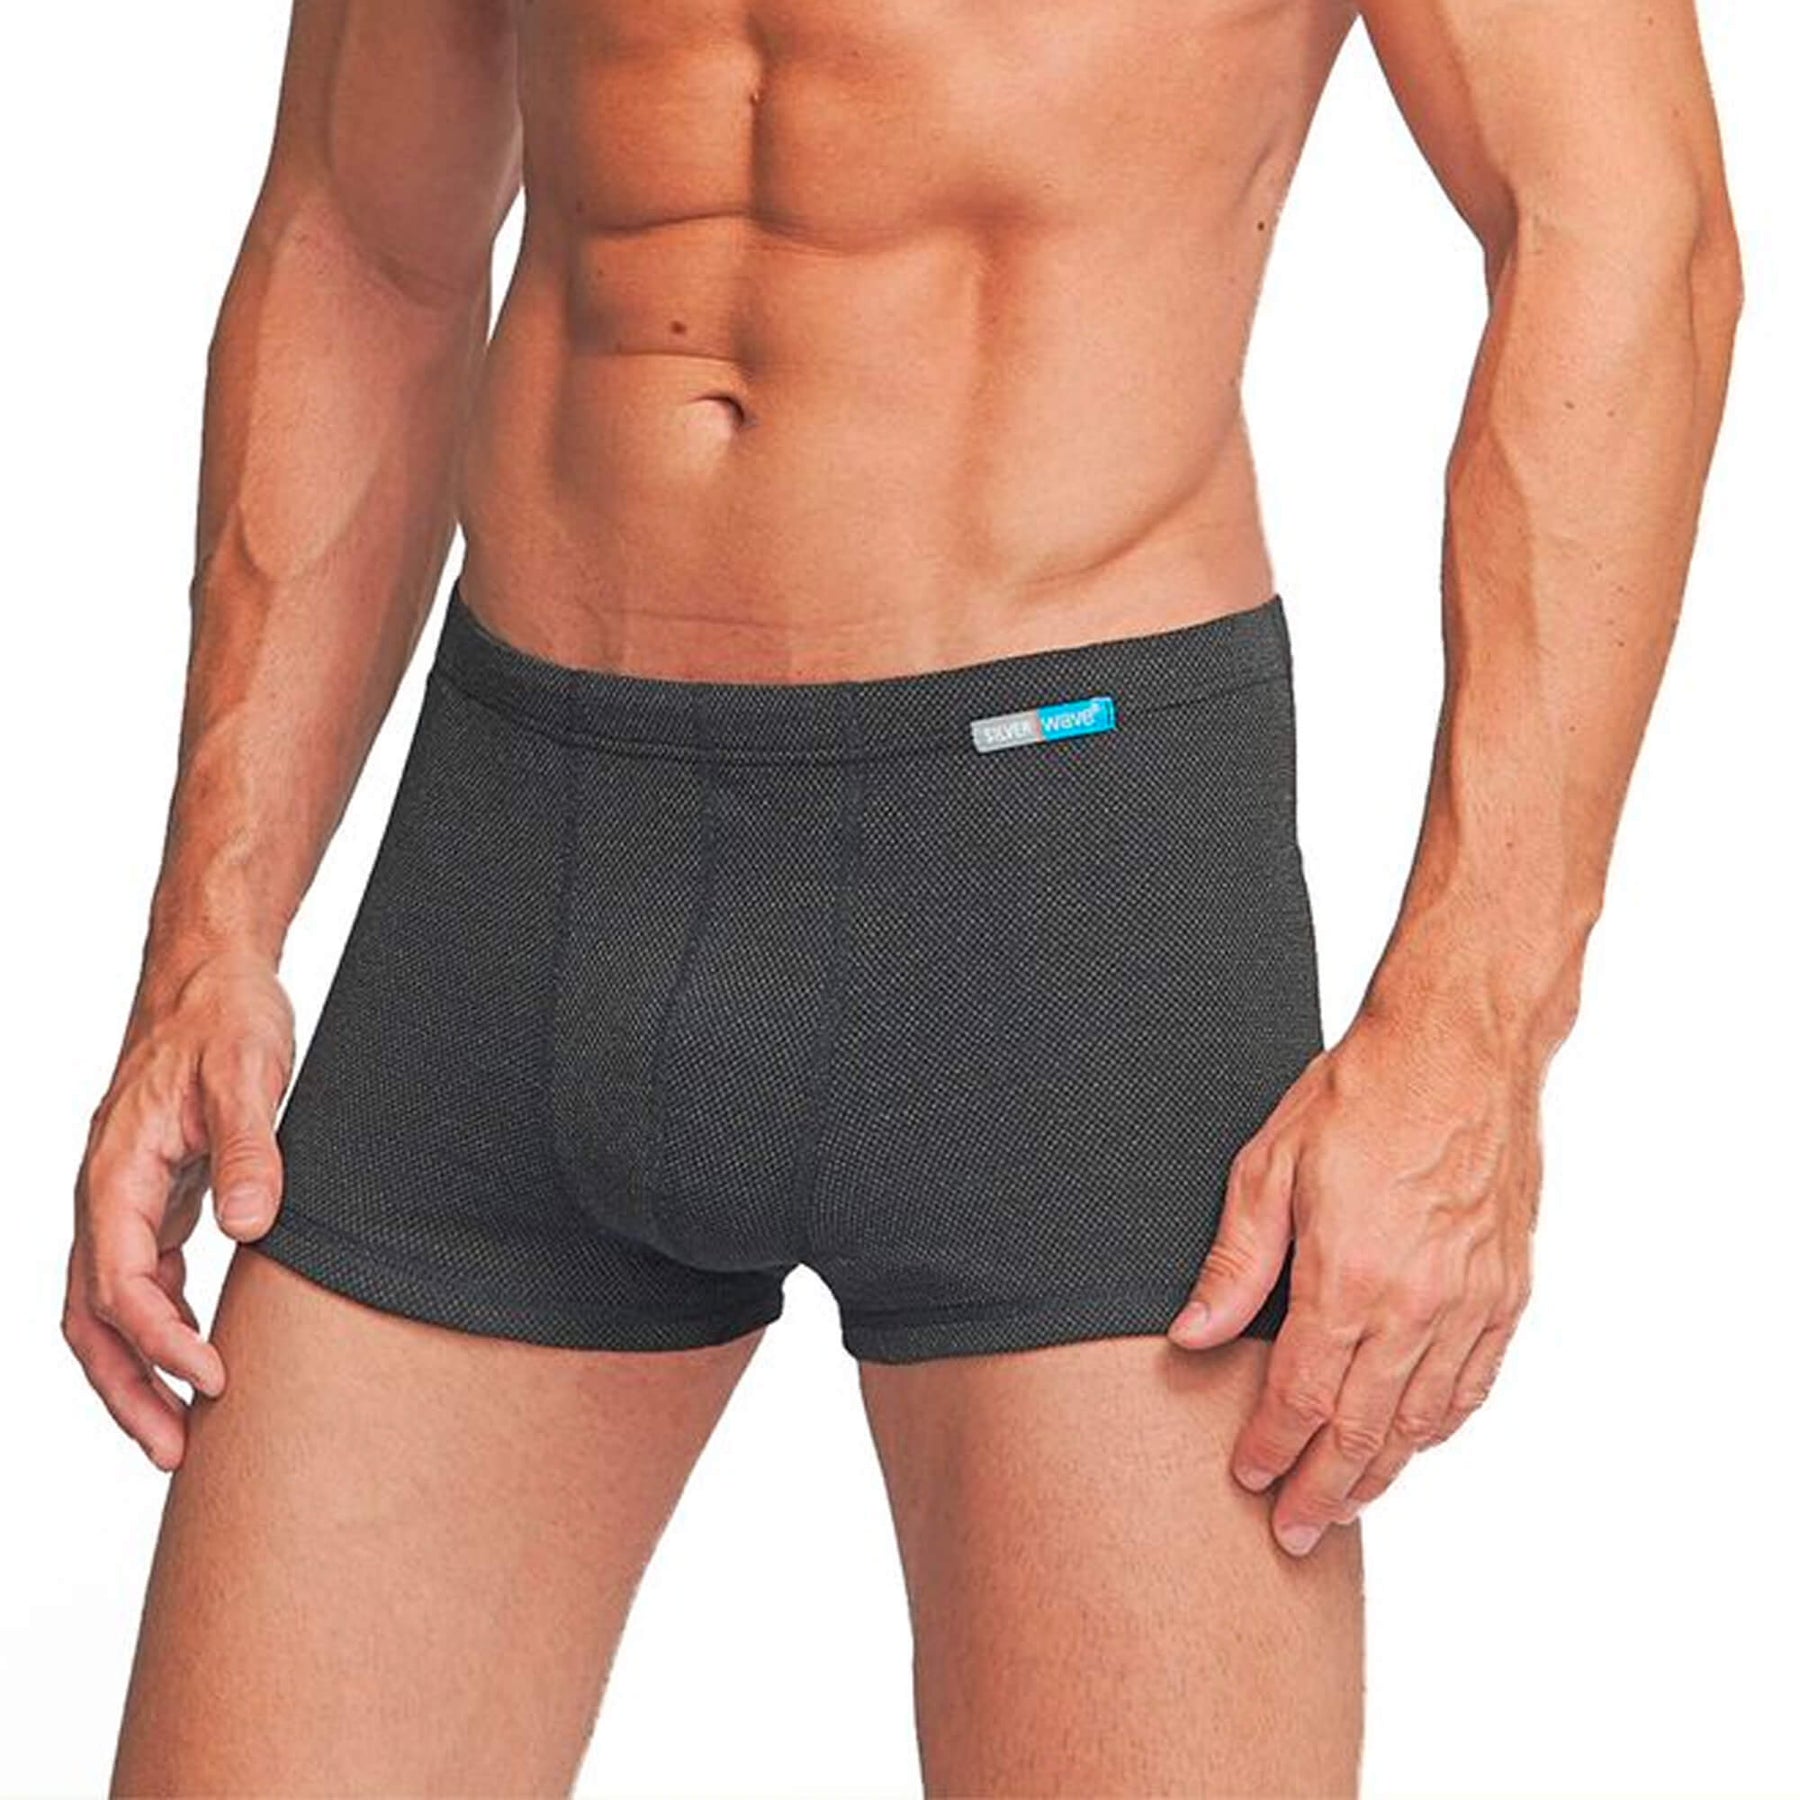 Silver25® 5G EMF Protection Mens Boxer Shorts in Cotton